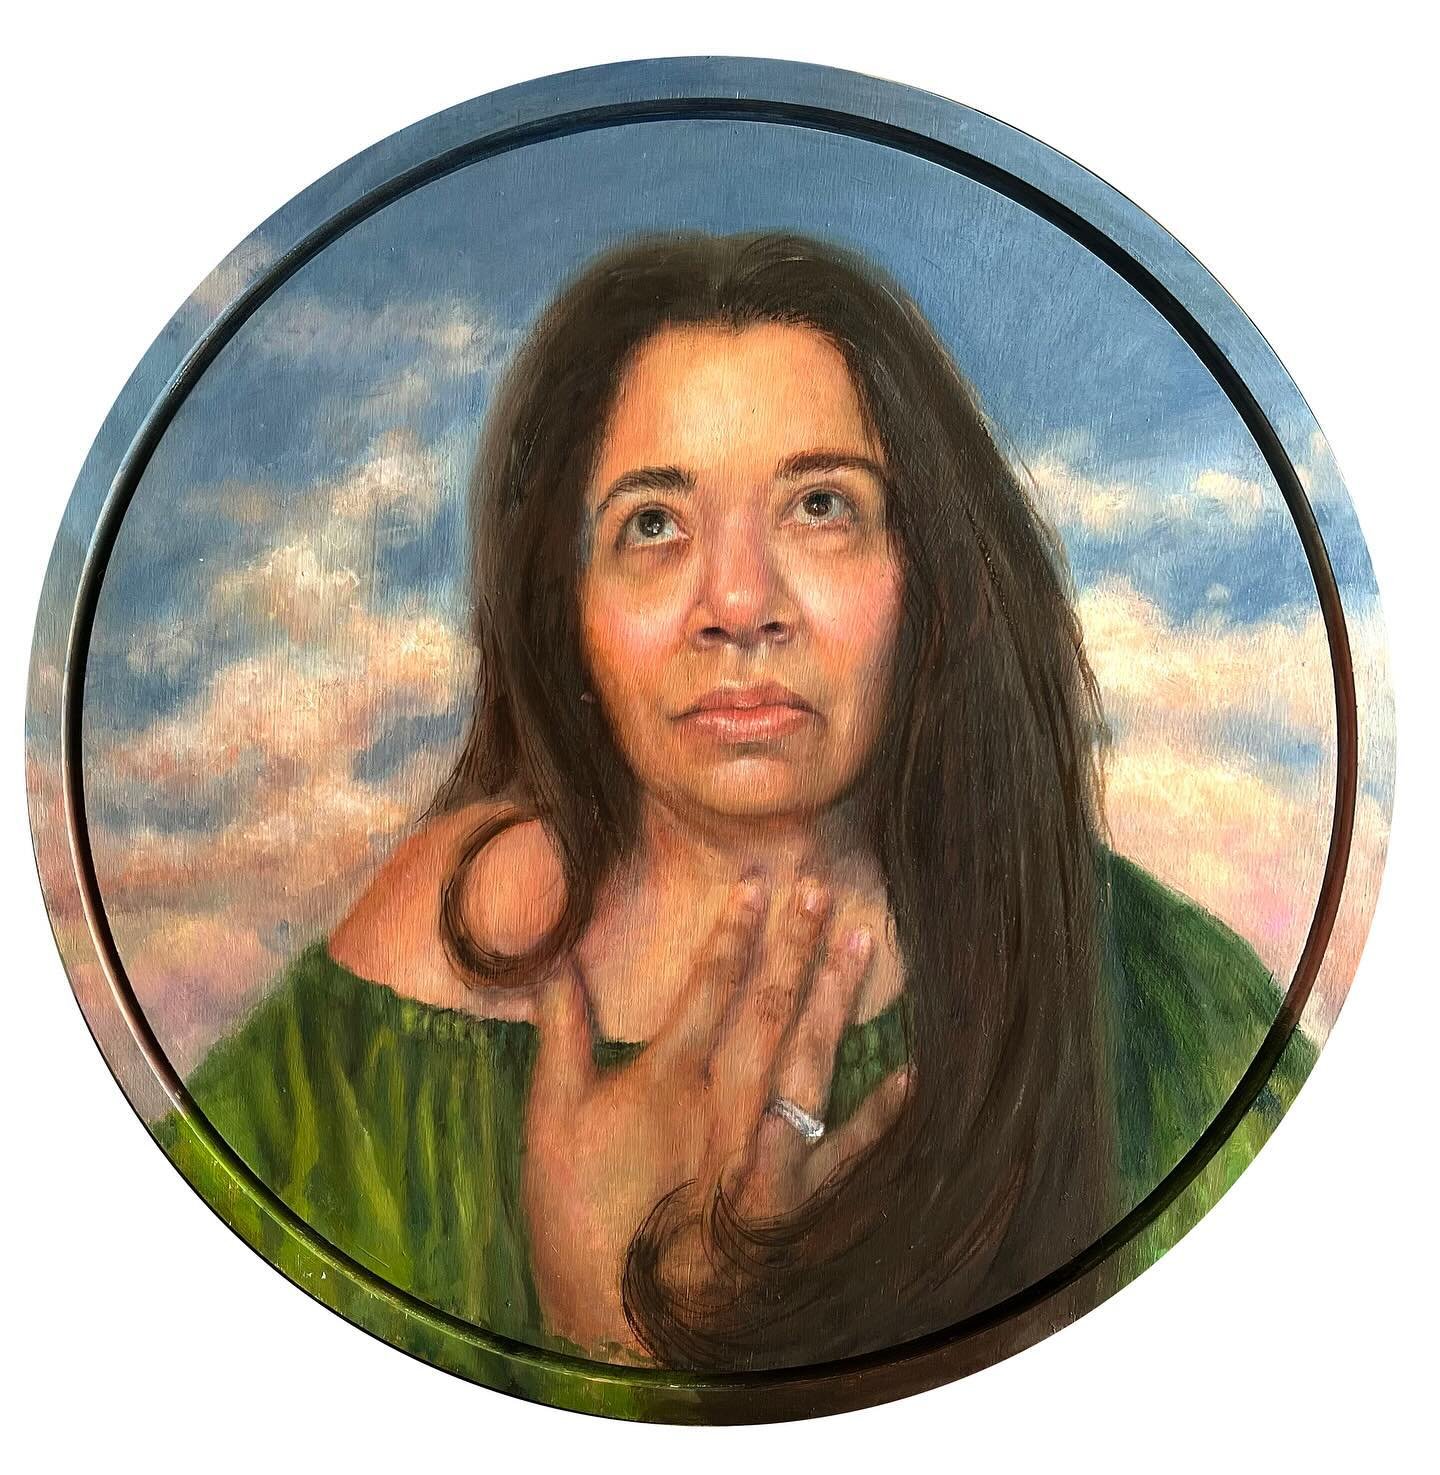 New work available ⤵️

Internal Monologue Part One, 2024
Oil on panel
18 in diameter | 45.7 cm diameter

Available through @33contemporary 
If you are interested in this painting or want to learn more - place a heart ❤️ on it on @artsy 
Link is in my